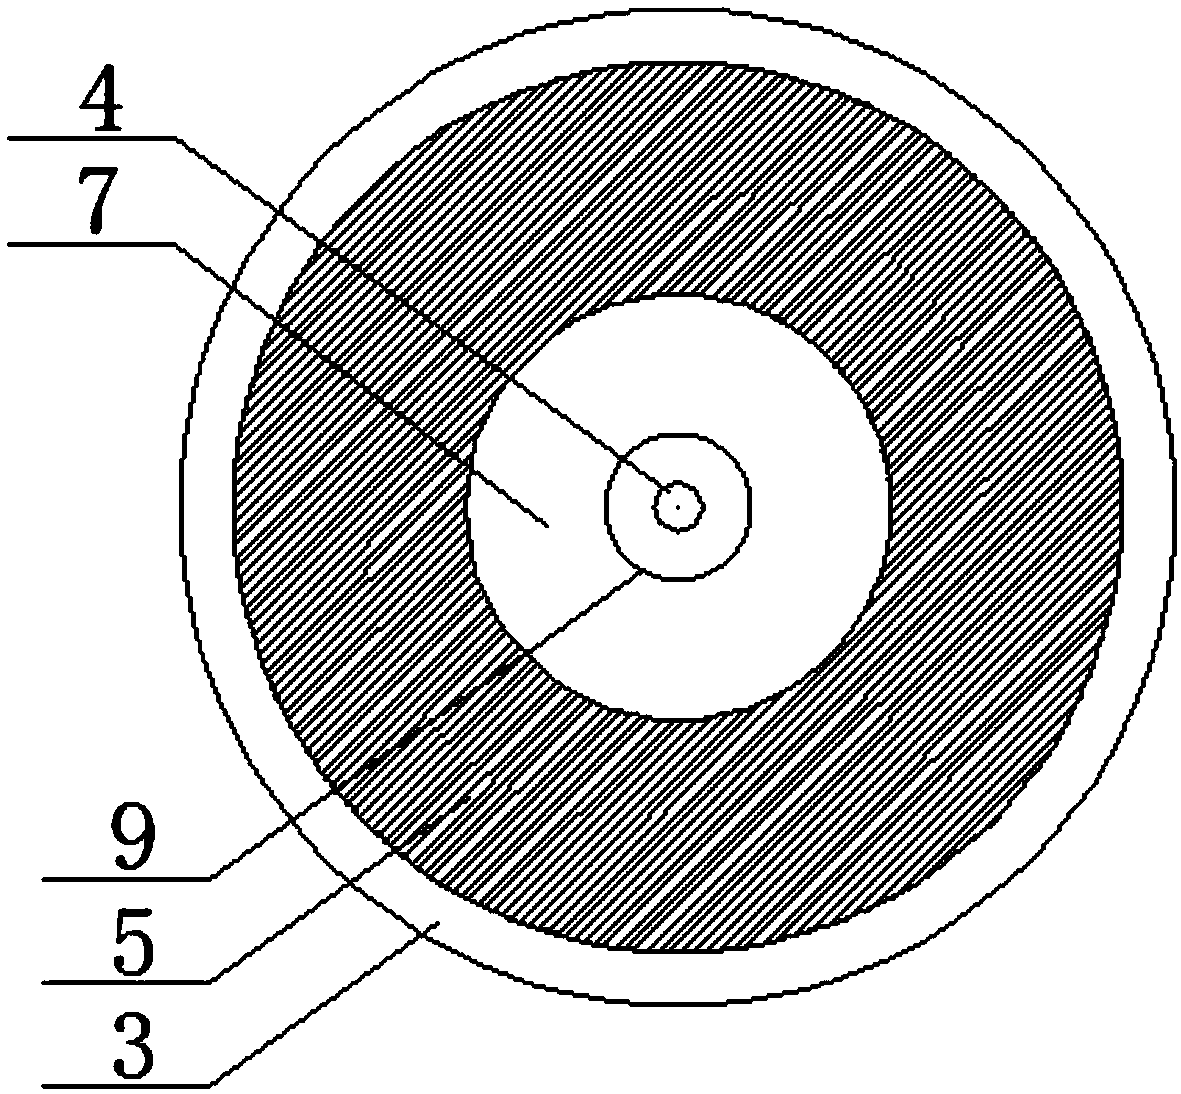 Retention electro-acupuncture needle and driving control module thereof